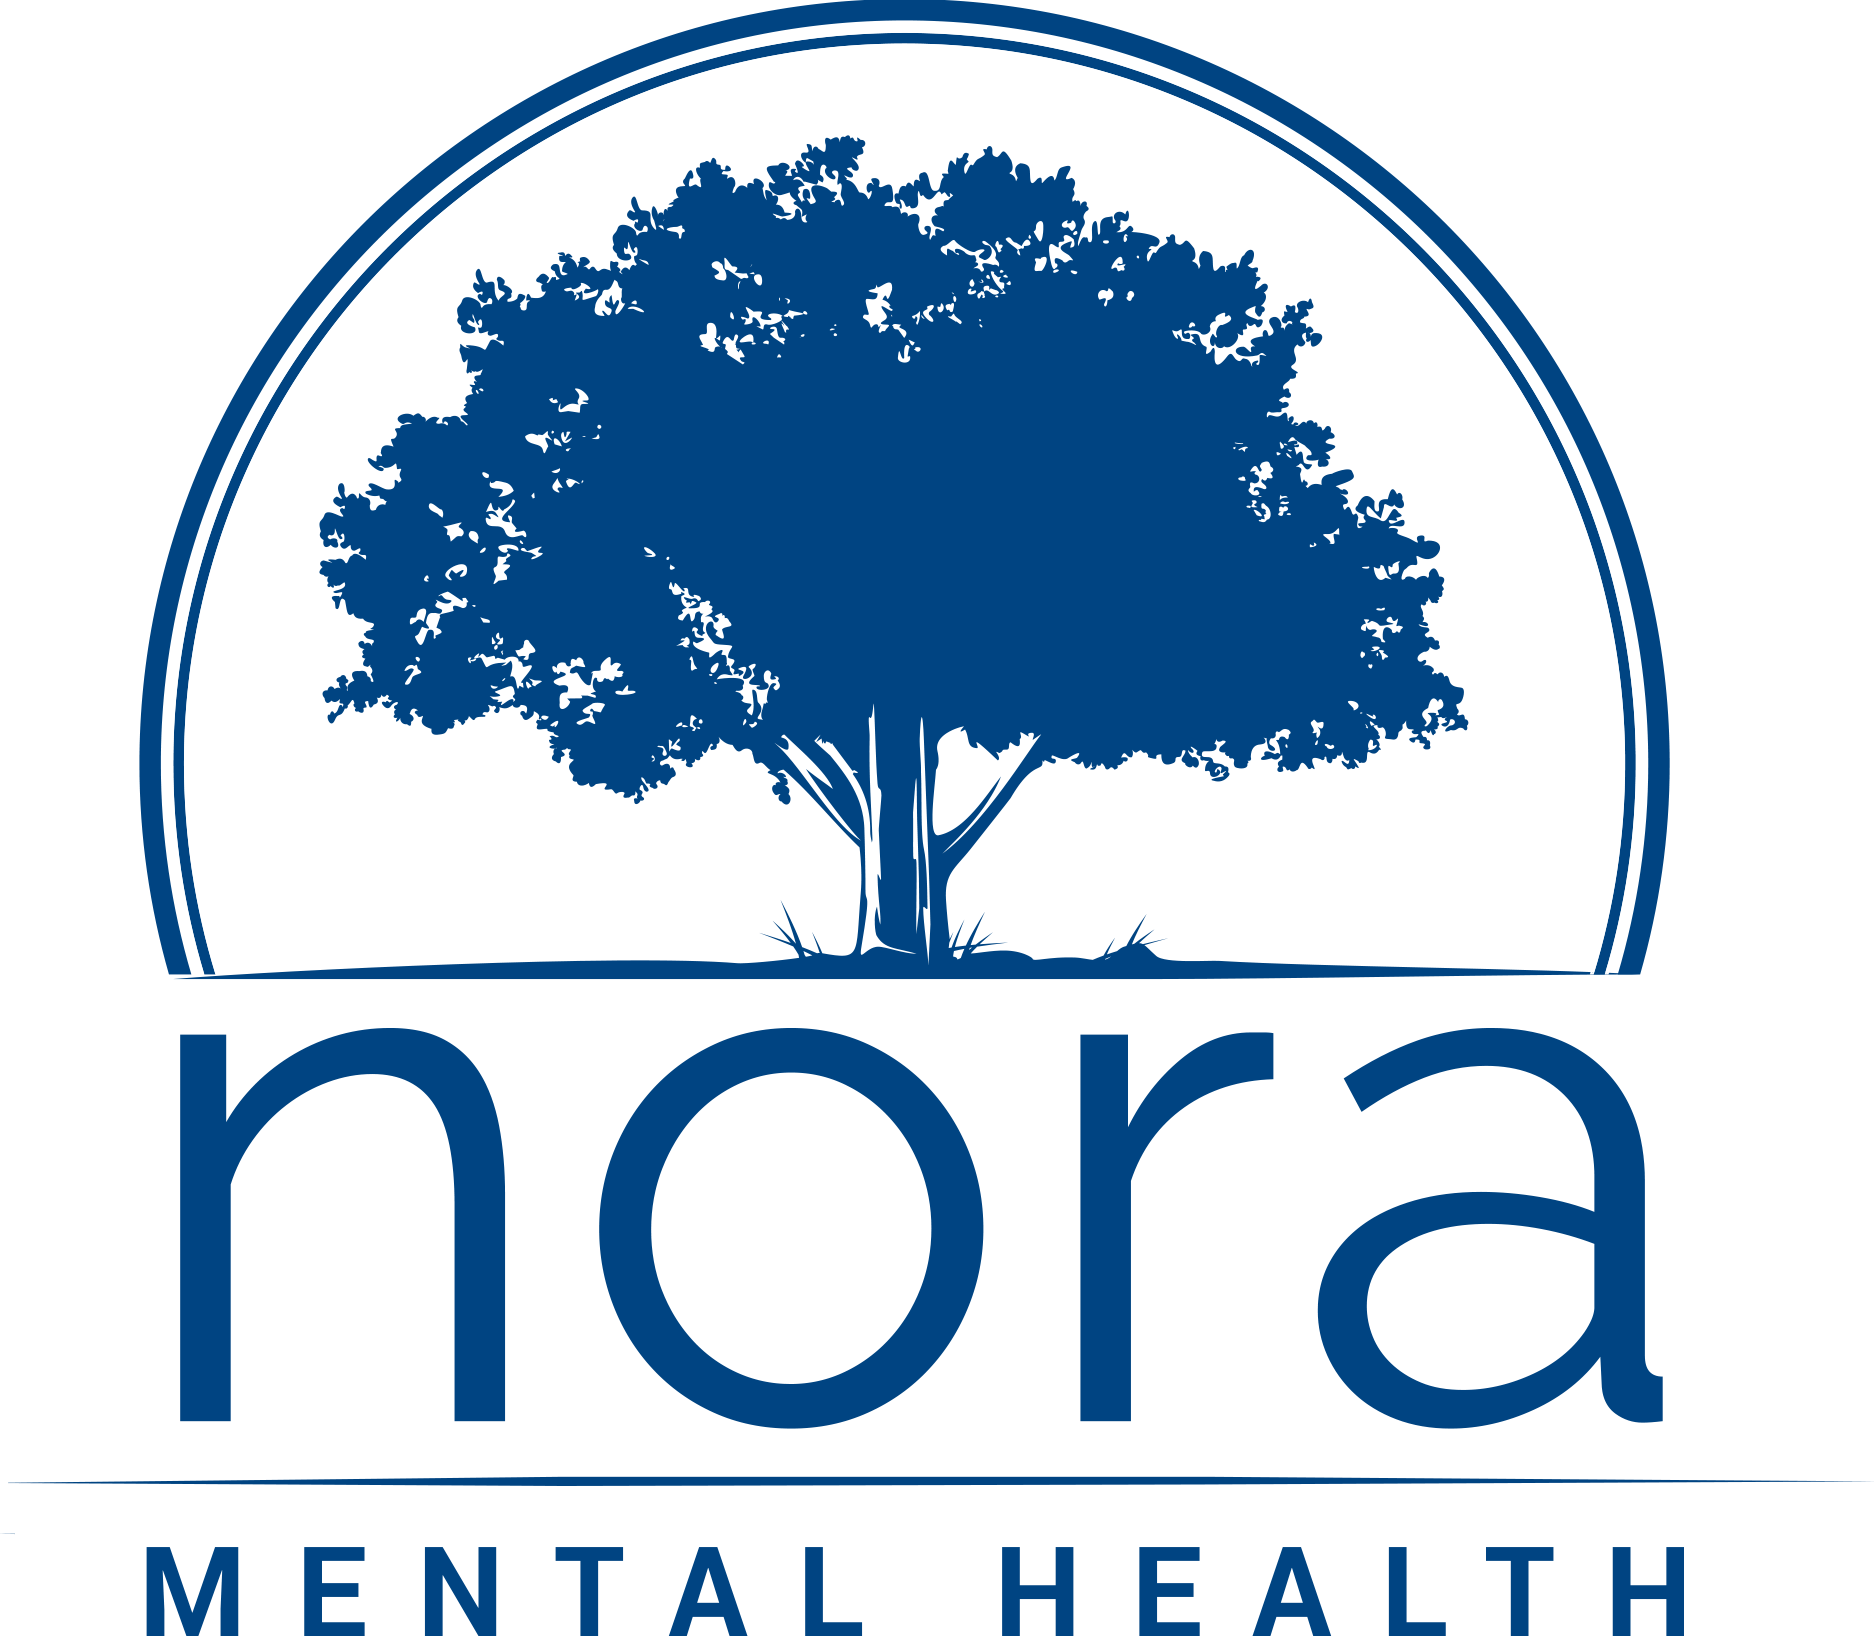 Texans to Enjoy Easier Access to Mental Health Services with New Nora Mental Health Franchise in Fort Worth